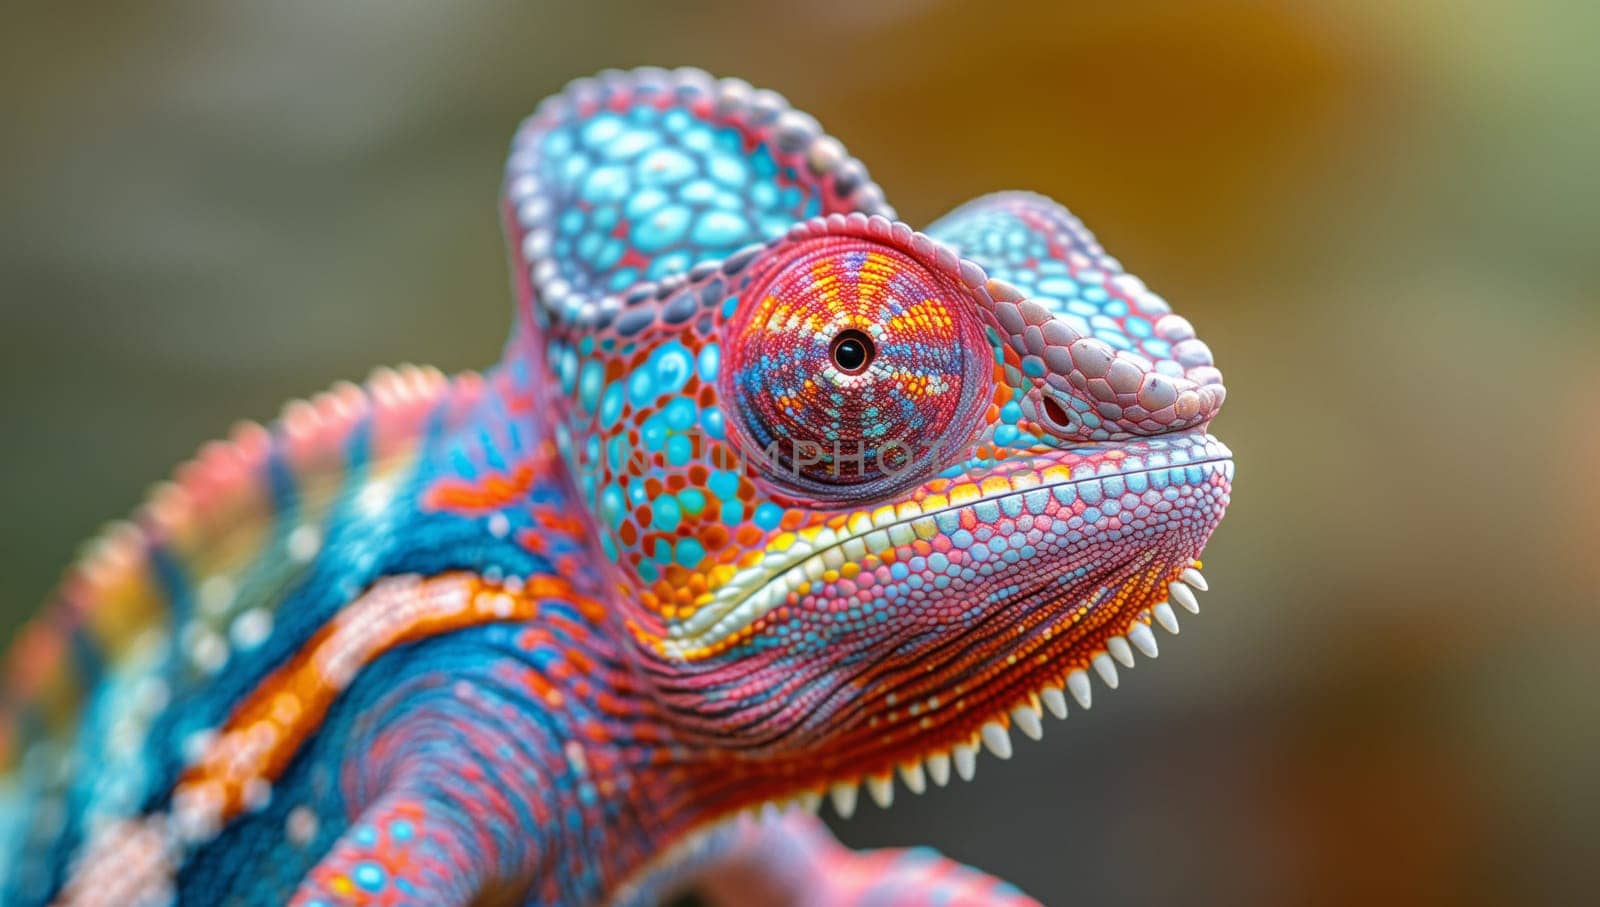 A vibrant electric blue lizard, resembling a dragon lizard, is perched on a branch, making eye contact with the camera in a captivating closeup shot